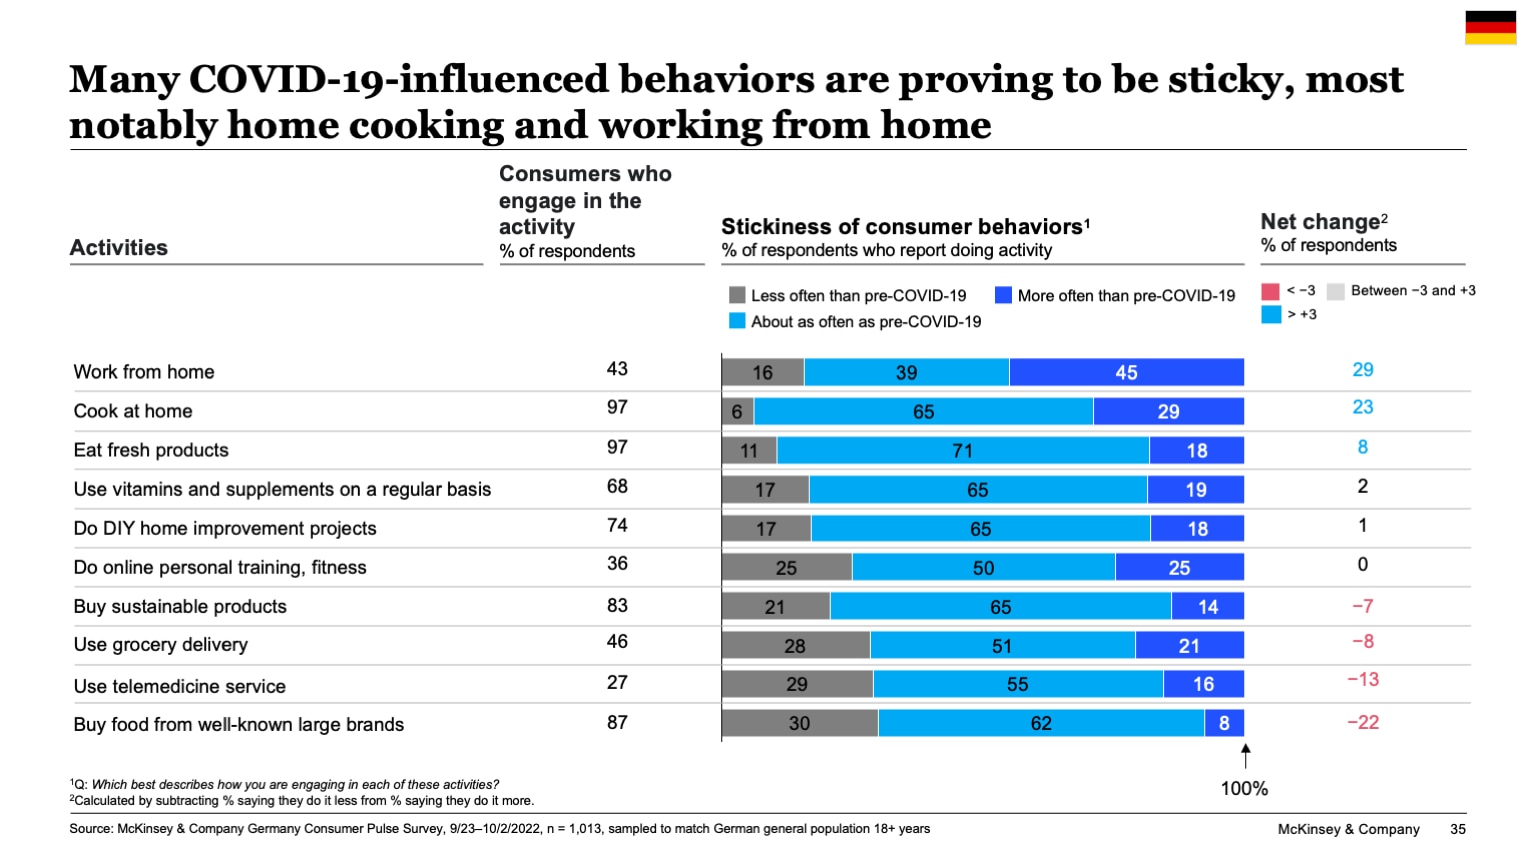 Many COVID-19-influenced behaviors are proving to be sticky, most notably home cooking and working from home